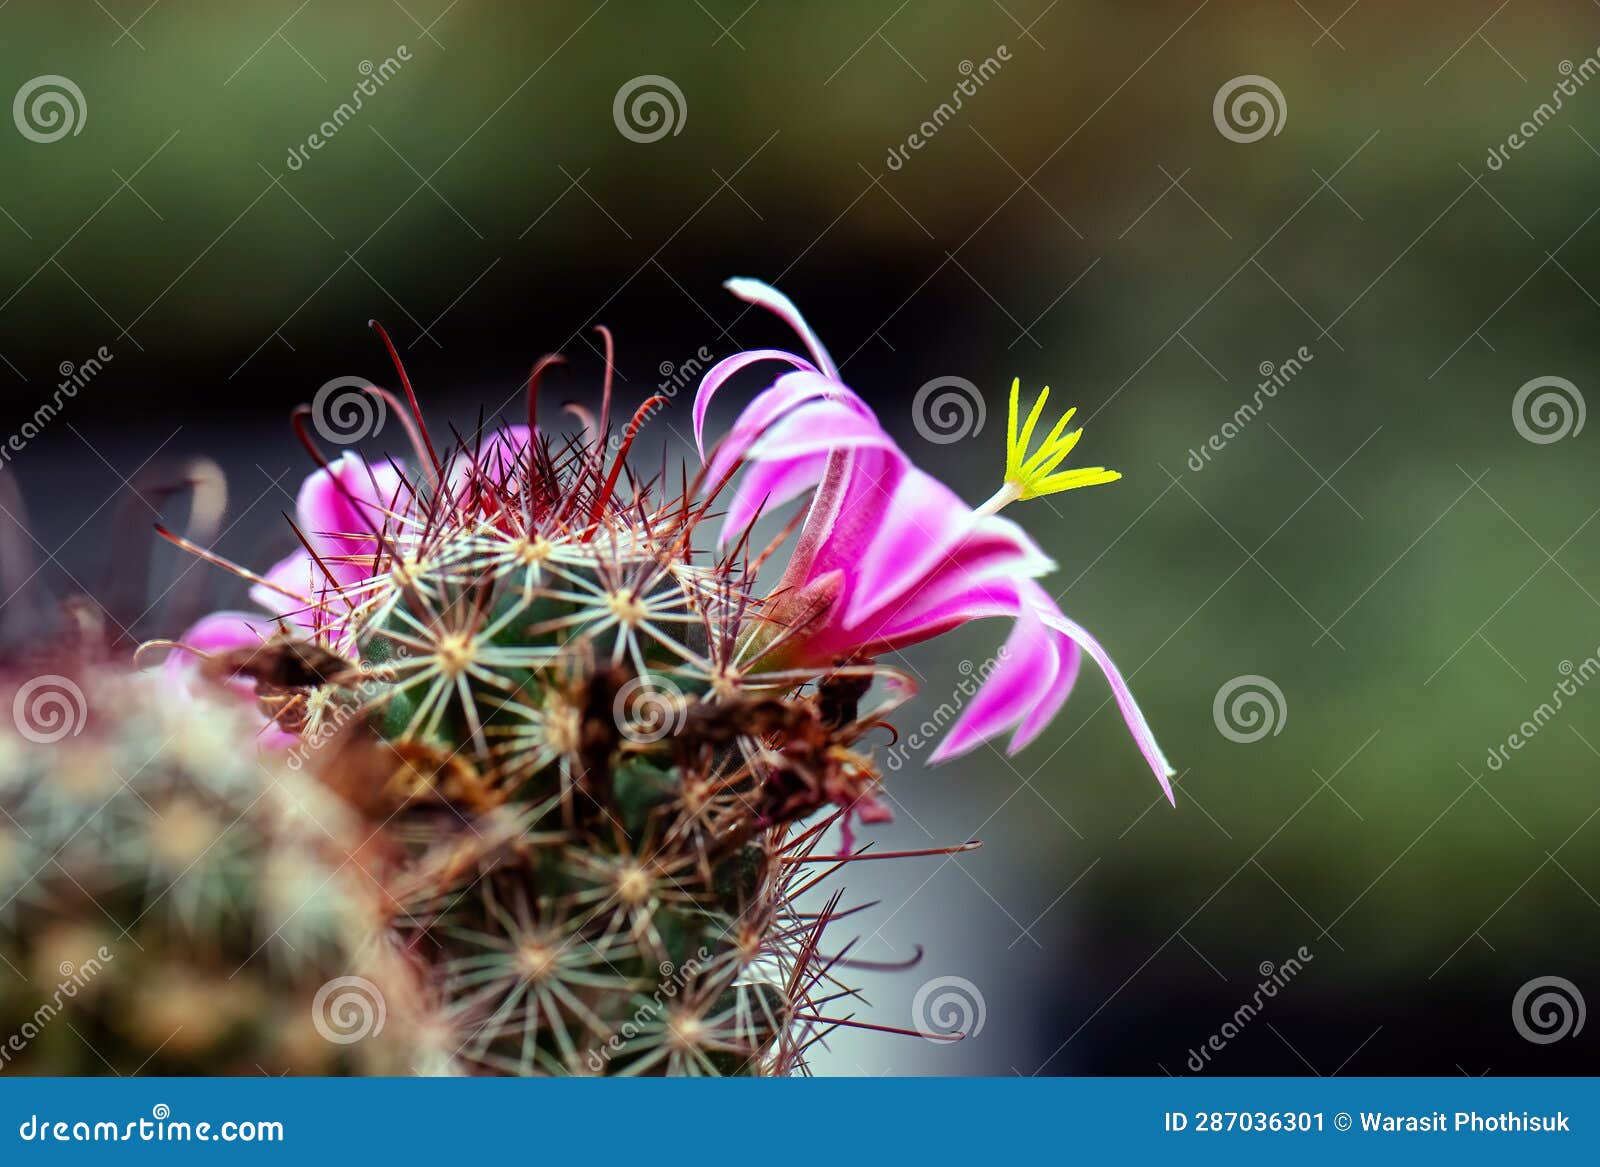 https://thumbs.dreamstime.com/z/mammillaria-benneckei-type-cactus-hook-spines-there-tuberous-propagation-clump-together-group-blooming-close-up-287036301.jpg